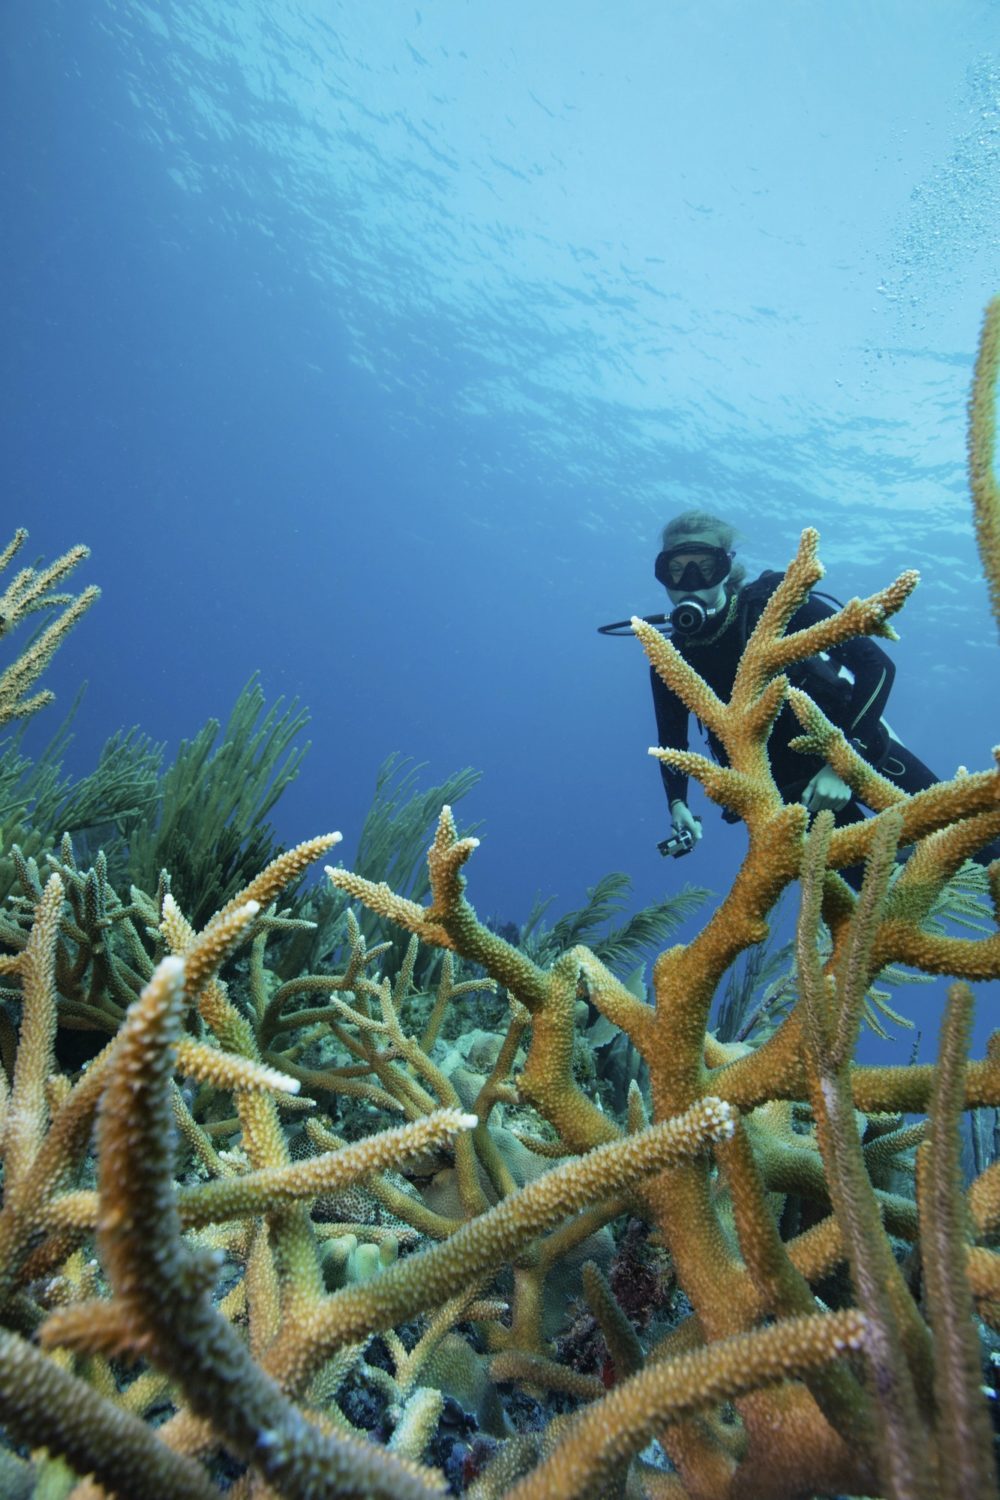 Reef scene with scuba diver and Staghorn coral